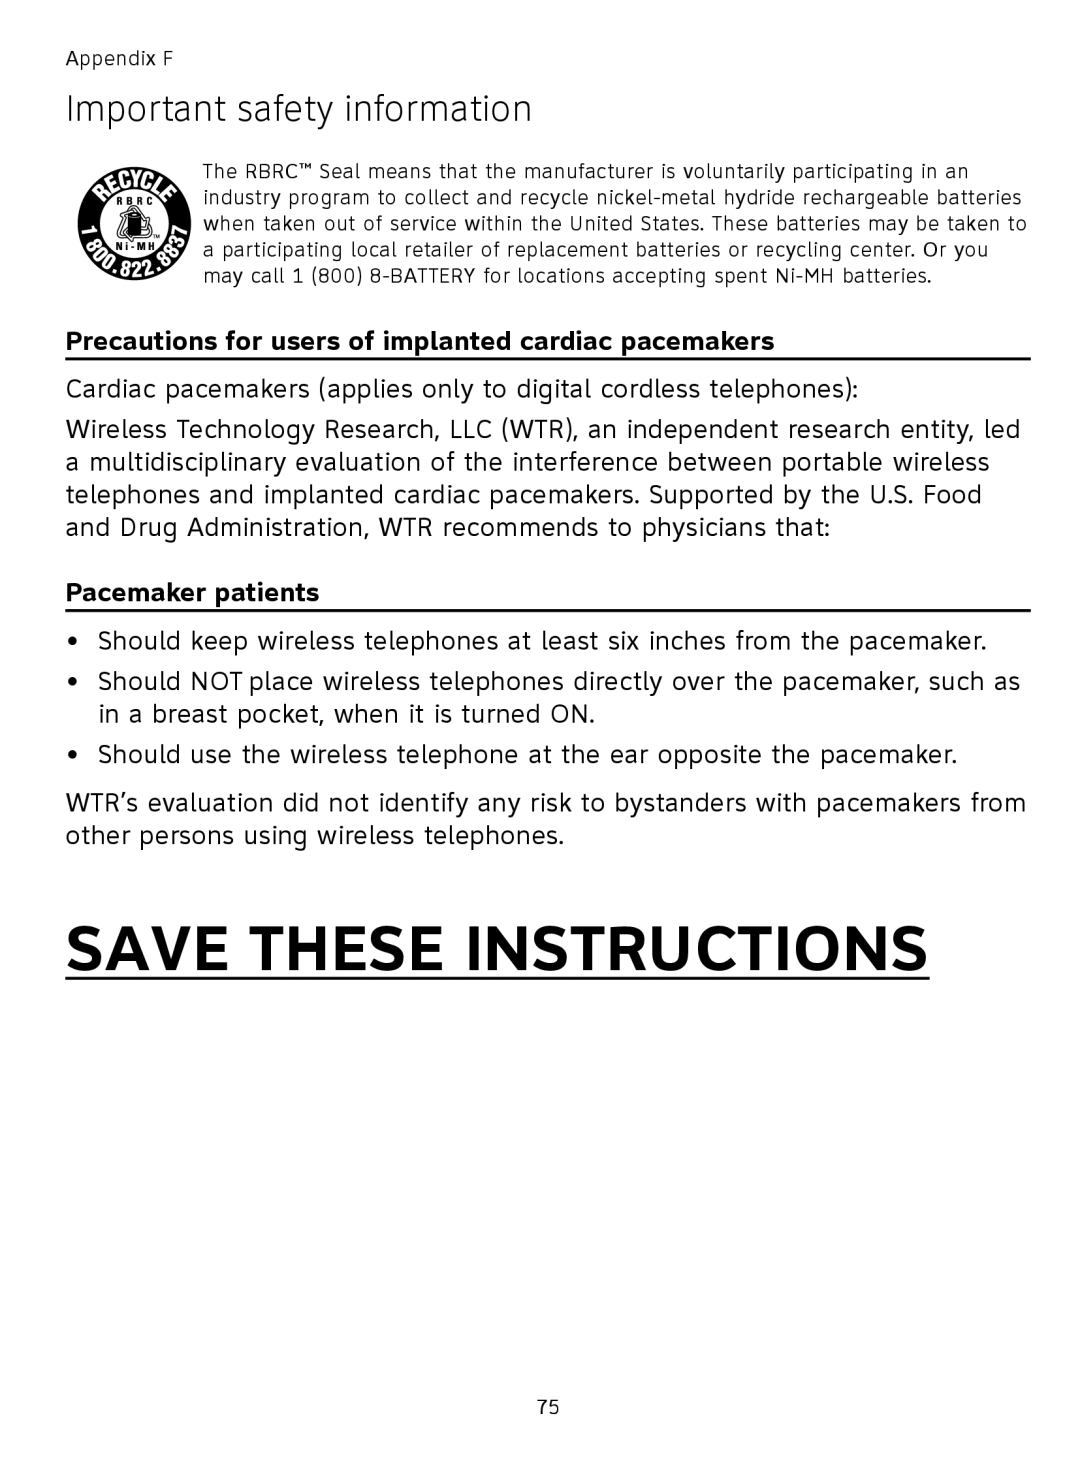 AT&T TL9178, TL91378 Precautions for users of implanted cardiac pacemakers, Pacemaker patients, Save These Instructions 